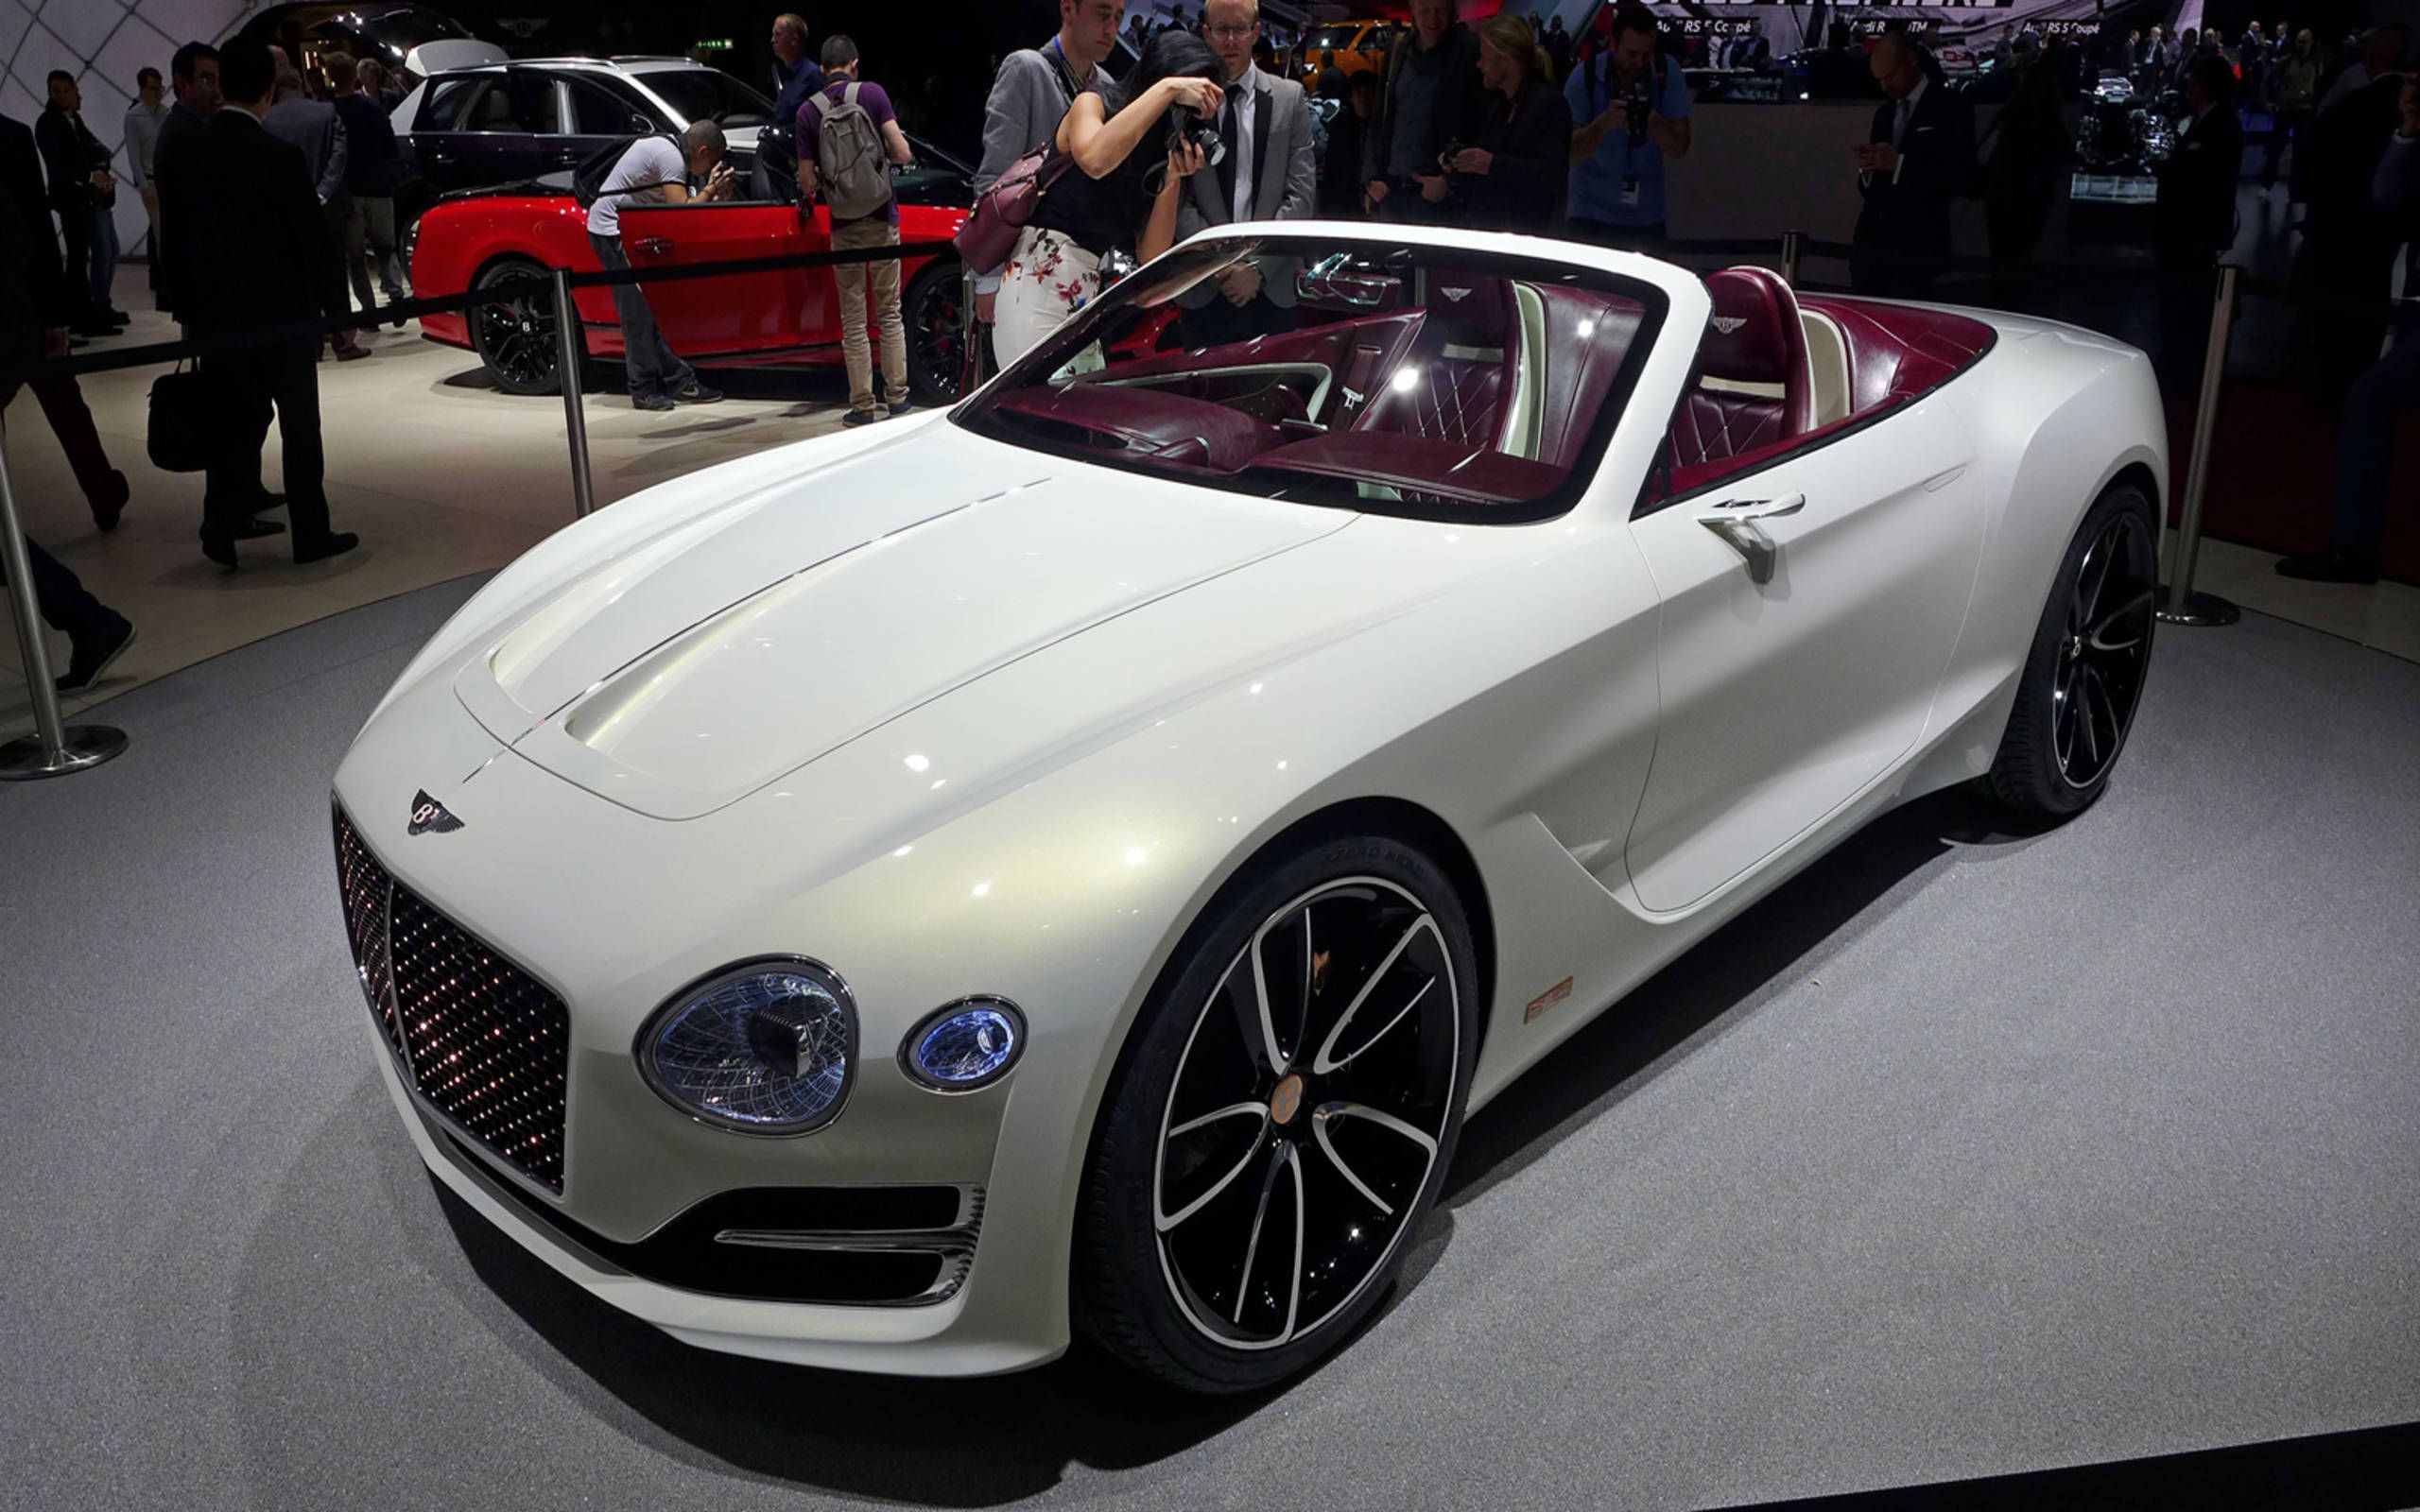 Bentley Tests The Ev Waters With The Exp 12 Speed 6e Concept